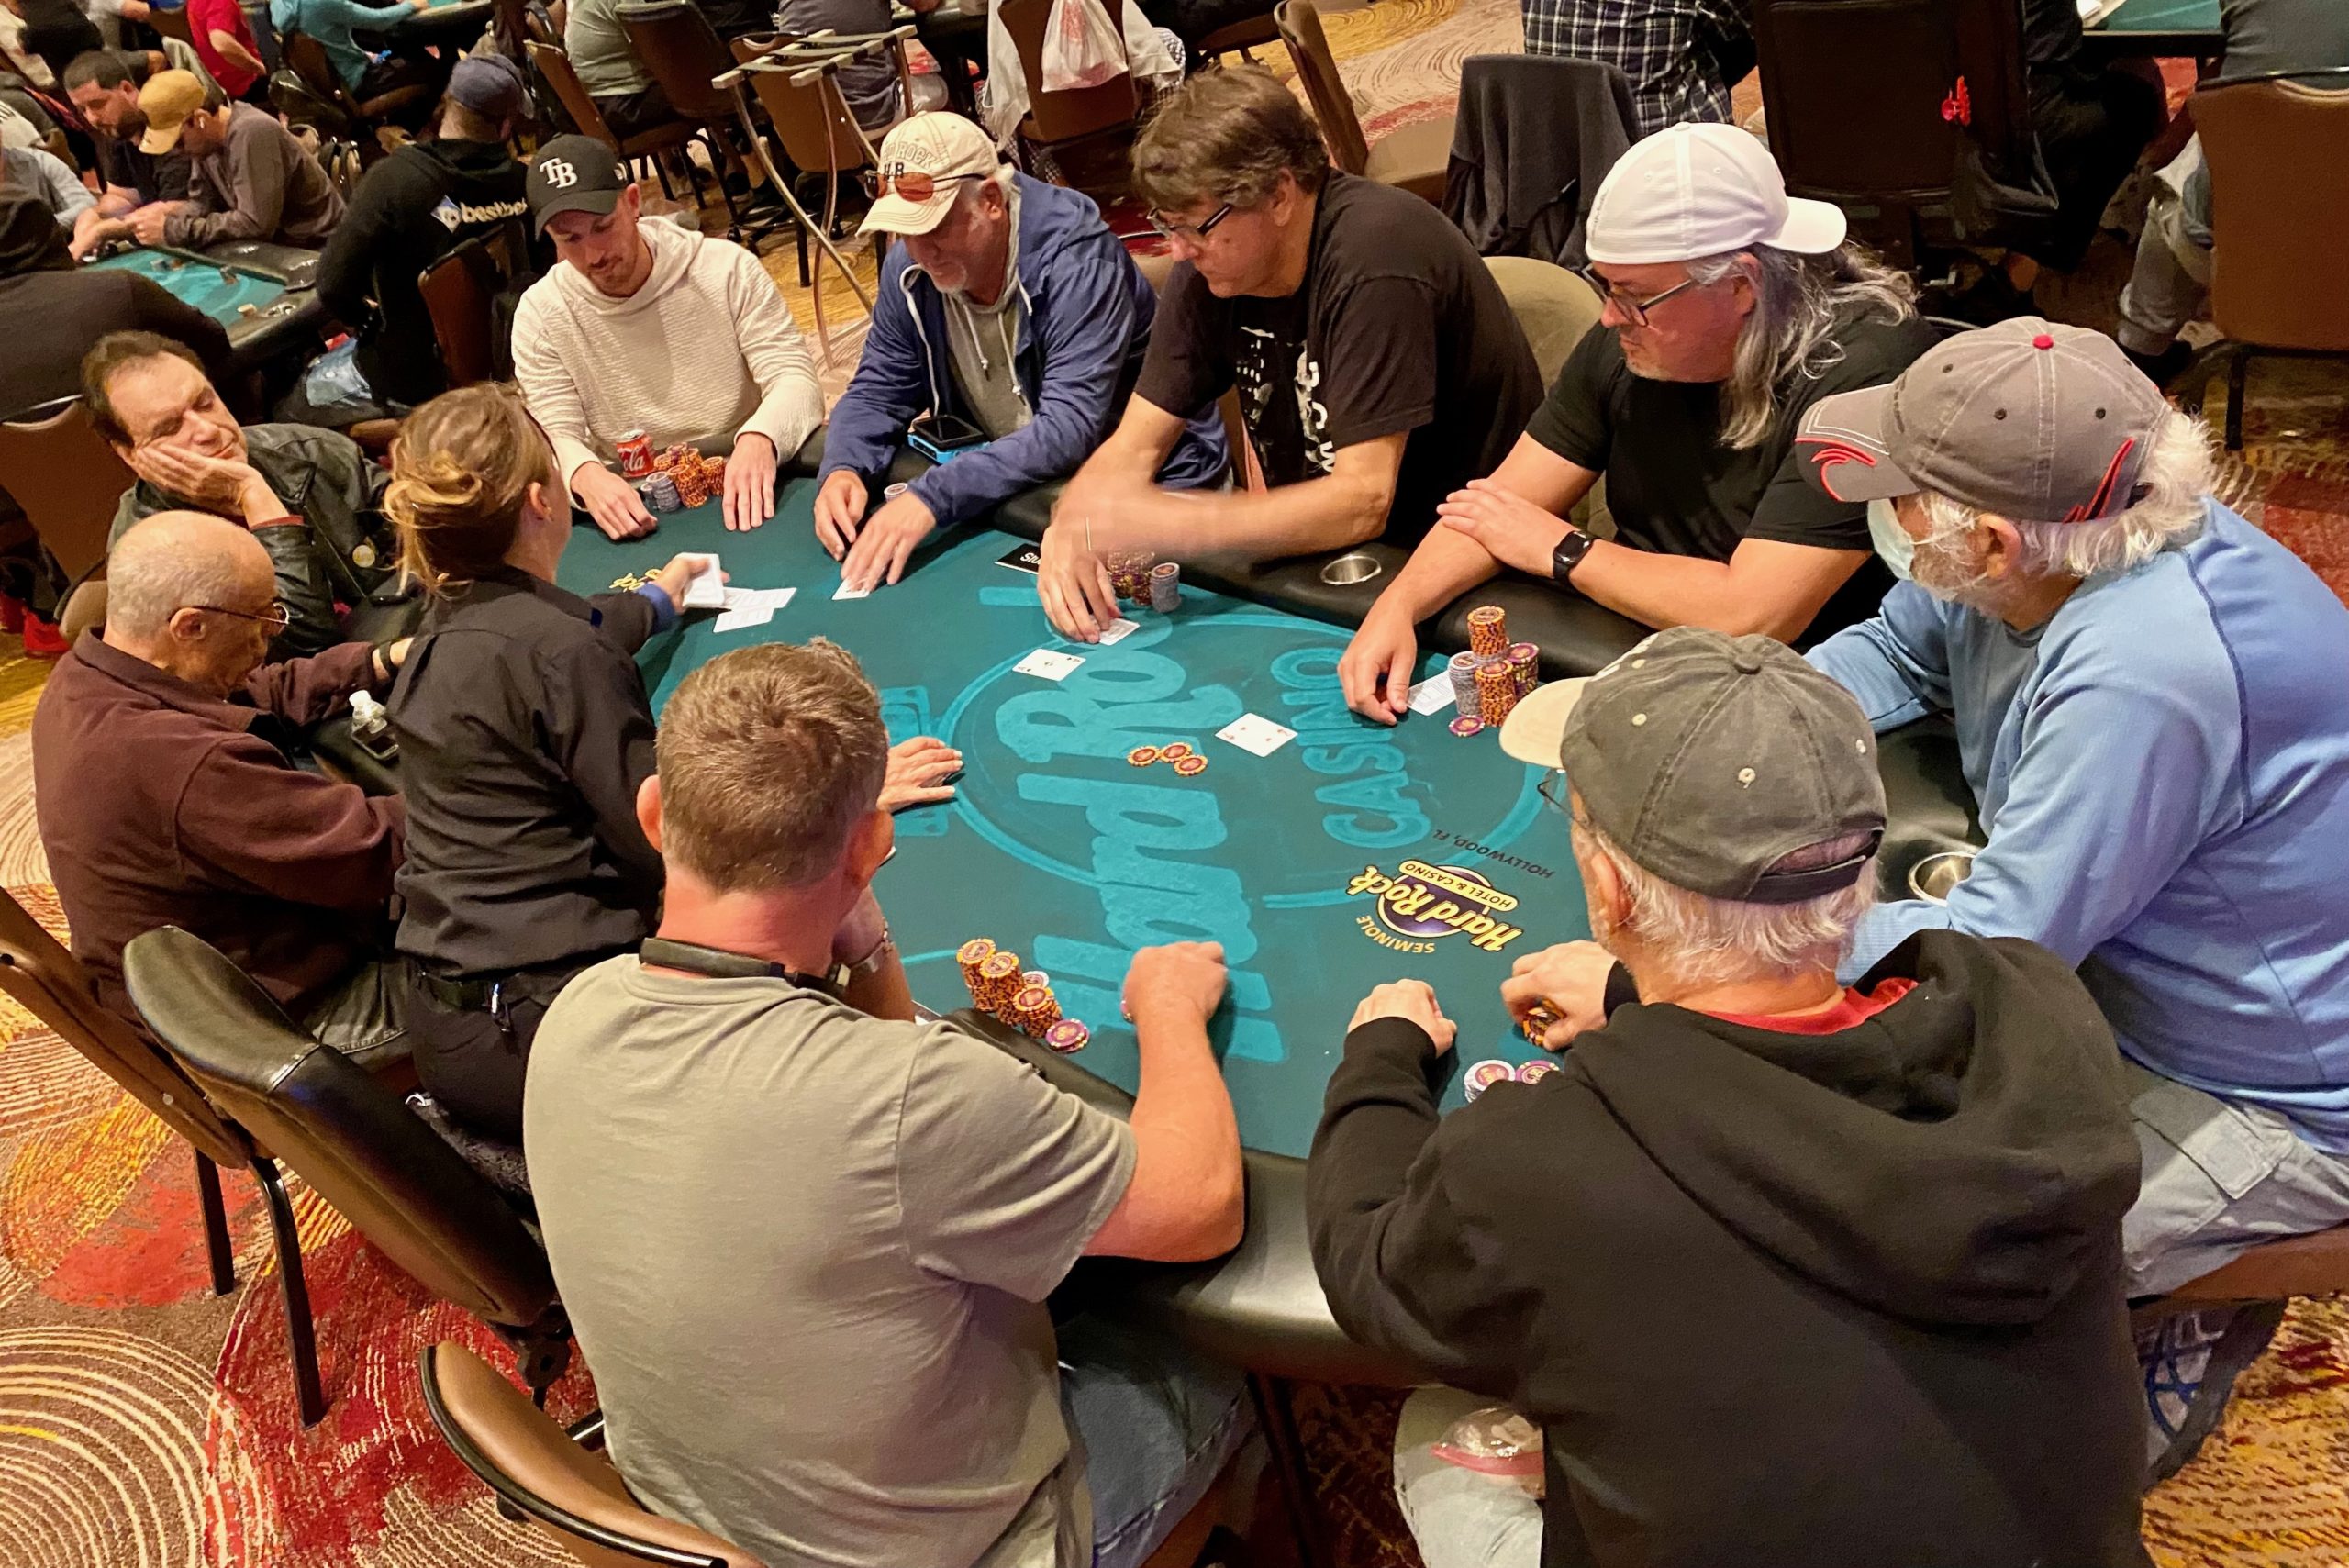 Event 8 Final Table